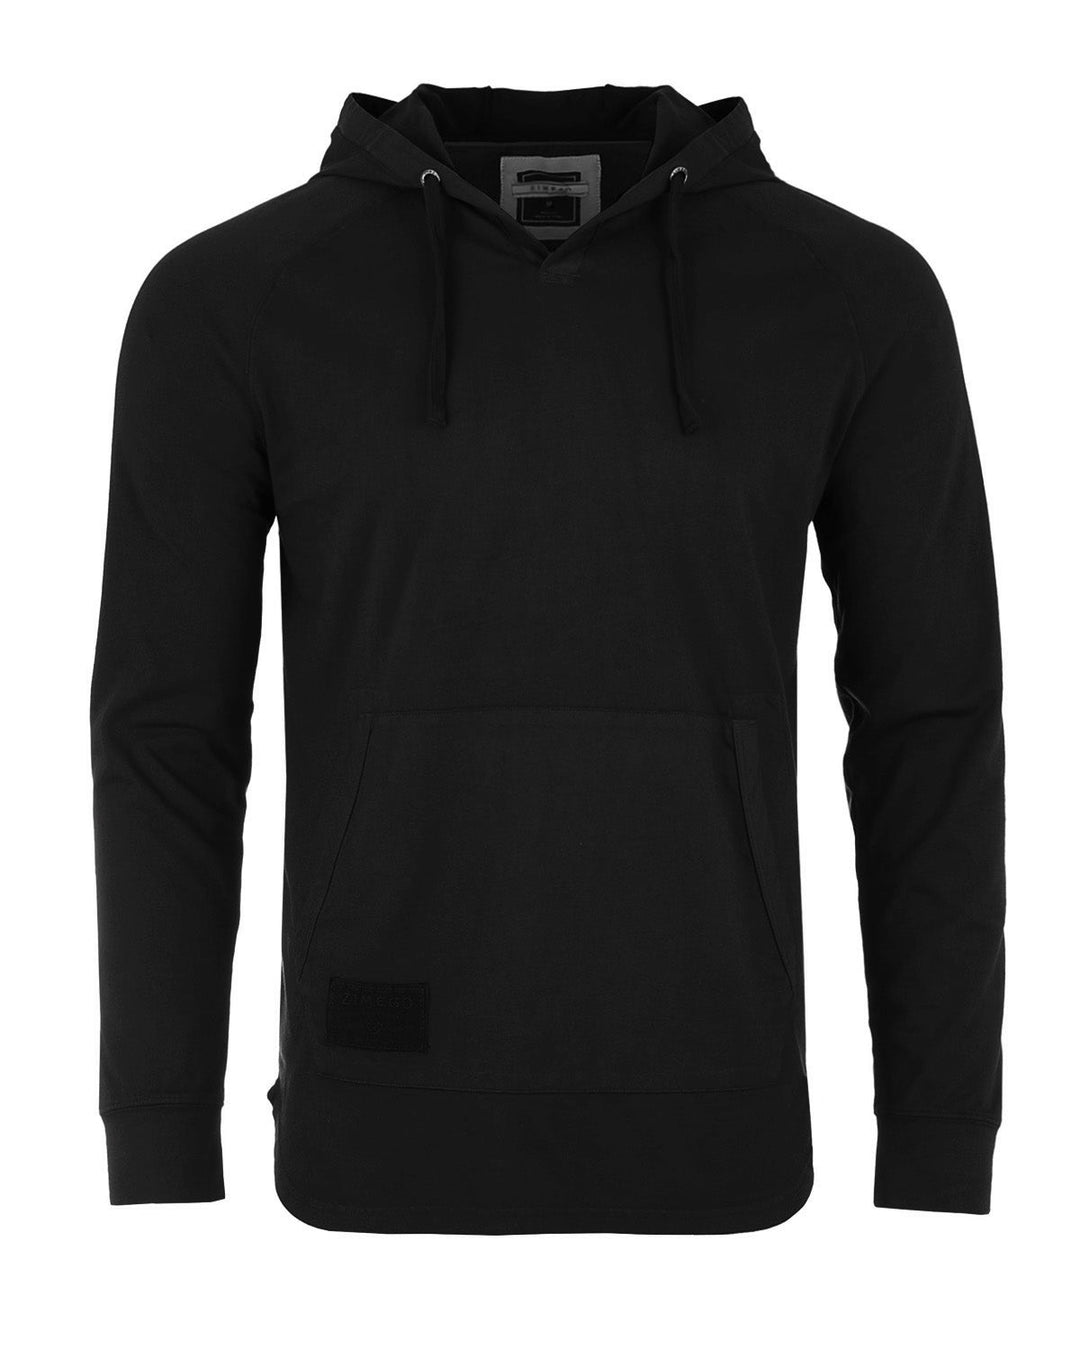 Black Pigment Dyed Hoodie Athletic V-Neck Long Sleeve Henley Pullover Shirt